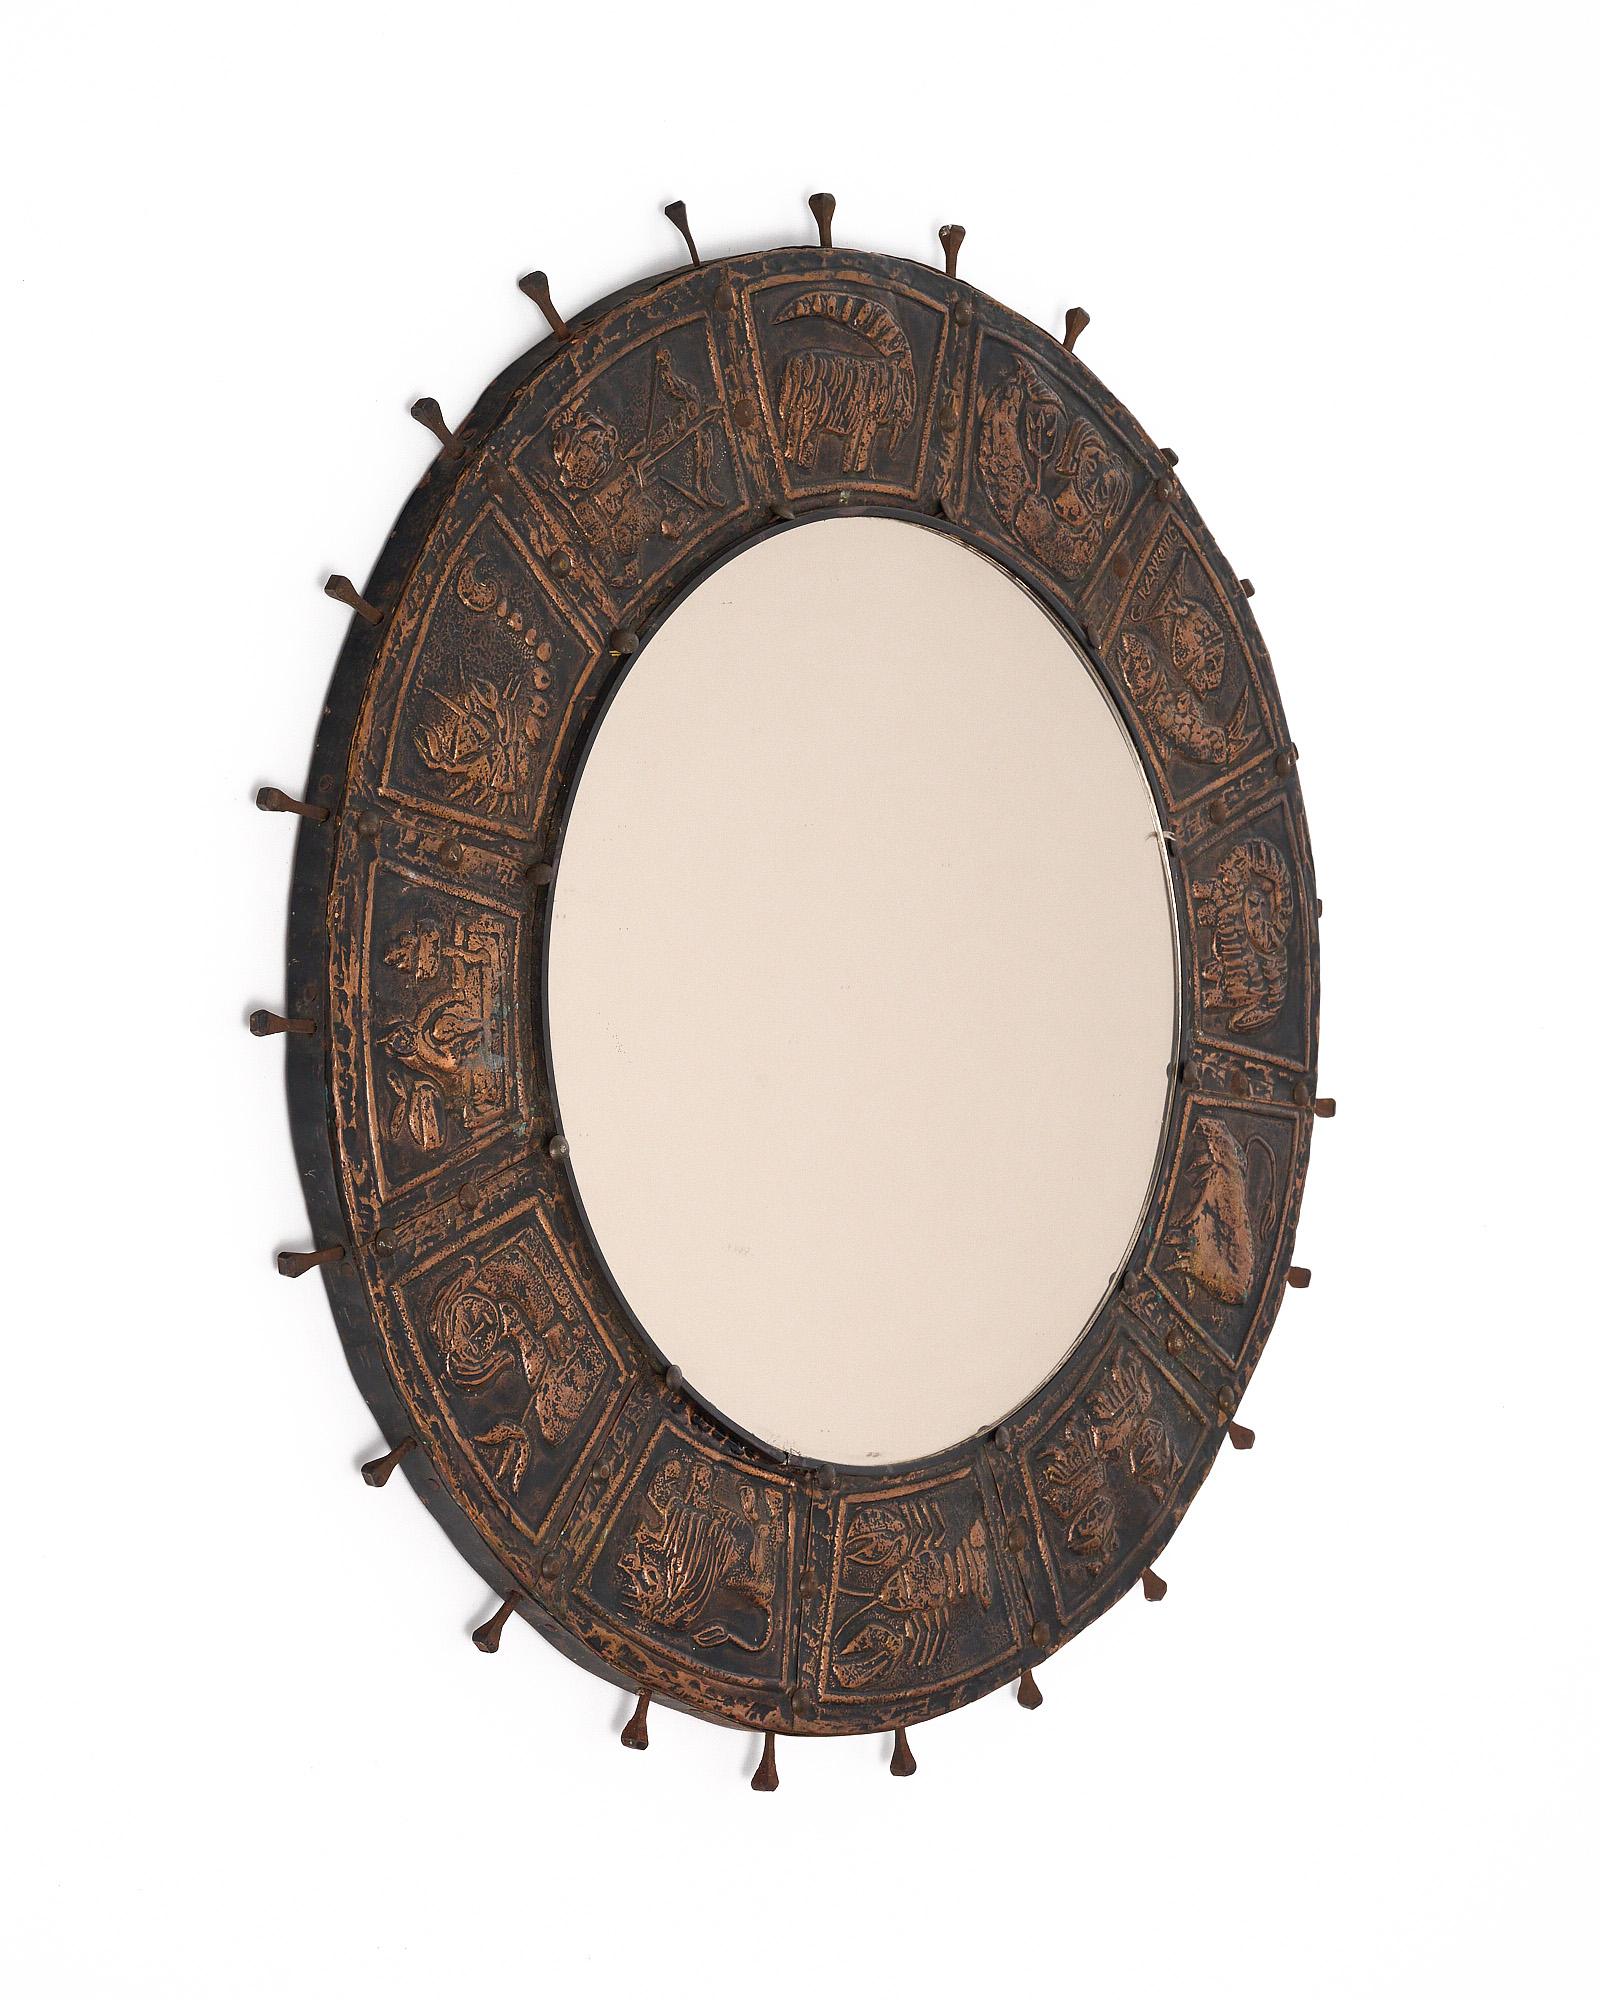 Mirror from mid-century France, featuring a circular frame of hand-hammered metal. The frame is adorned with designs showcasing the zodiac signs. The central mirror is circular as well.